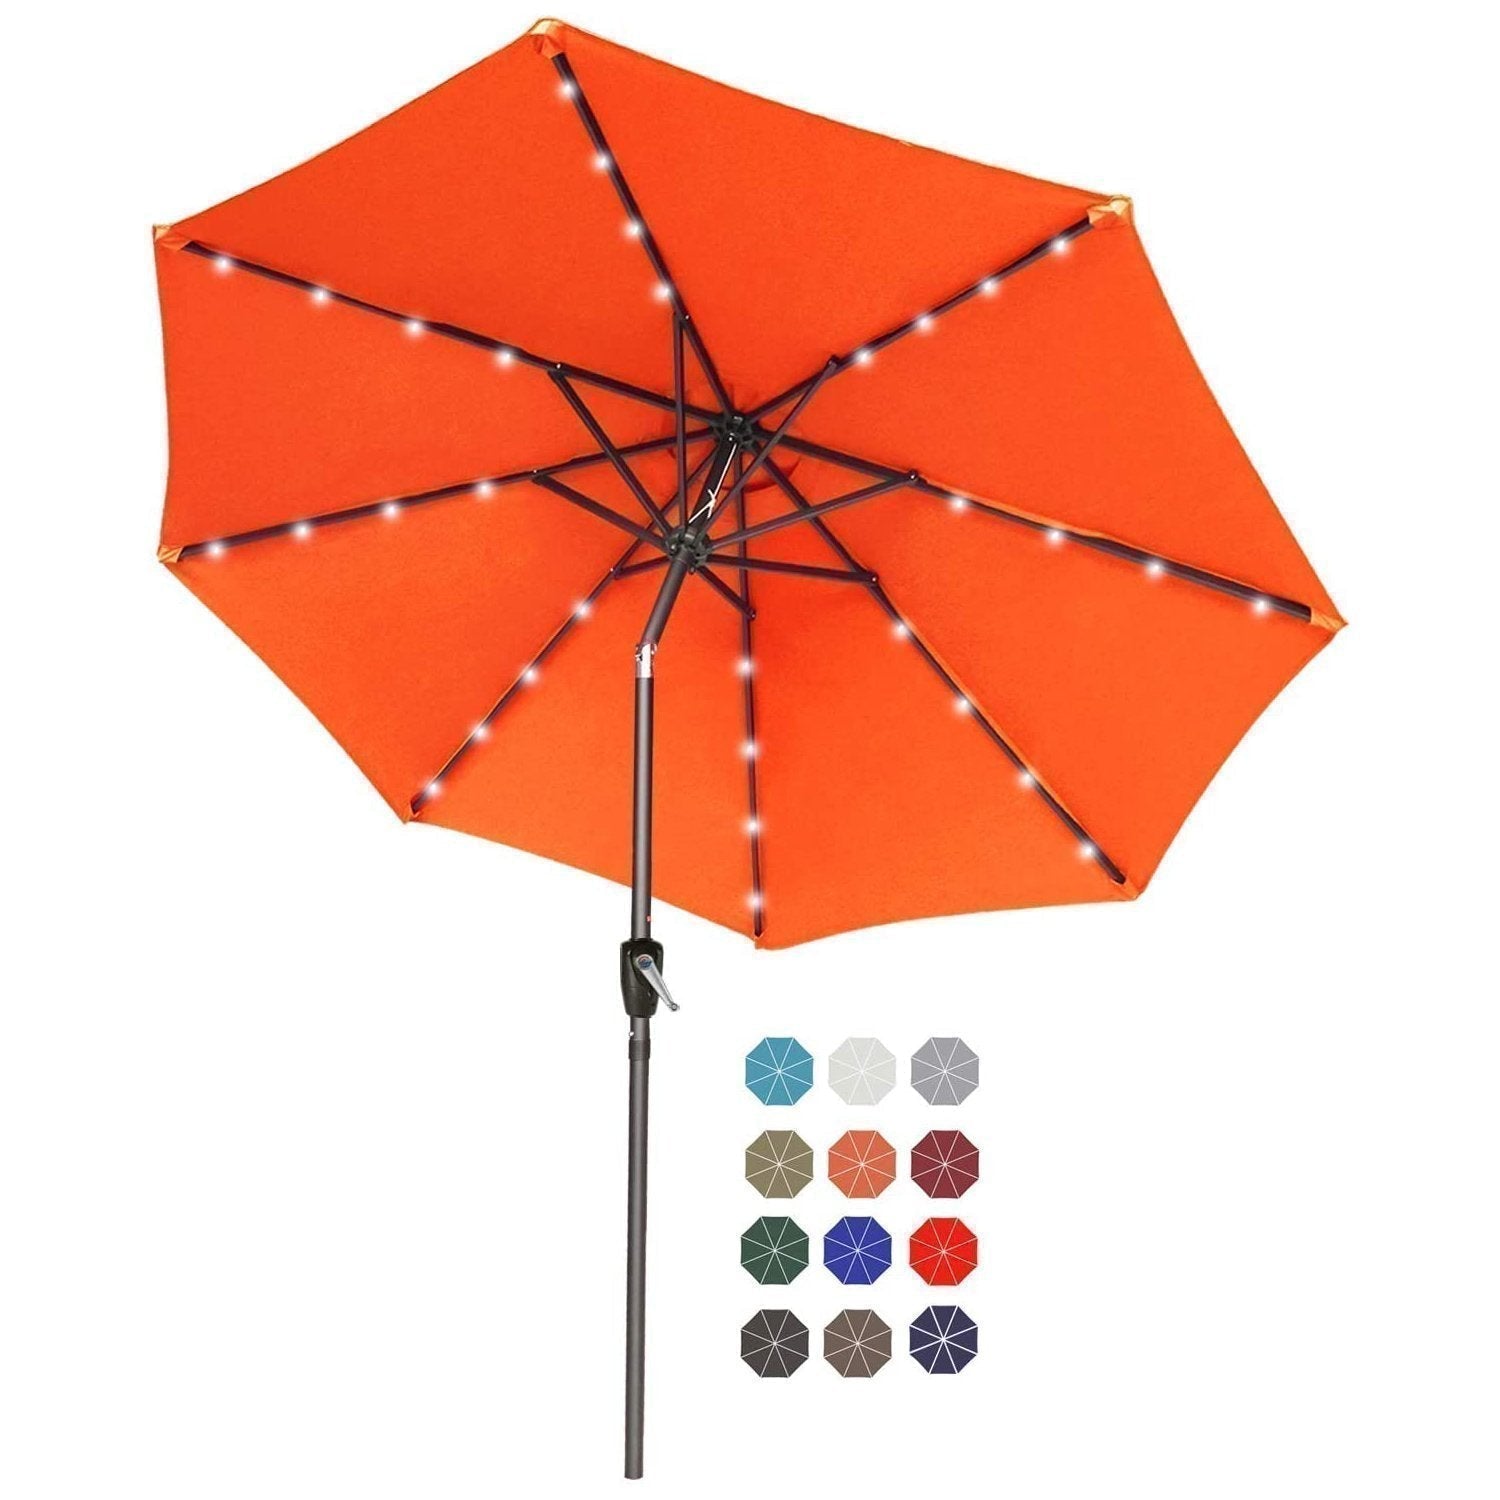 Patio Solar Umbrella Outdoor with 32LED Lights - ABC-CANOPY